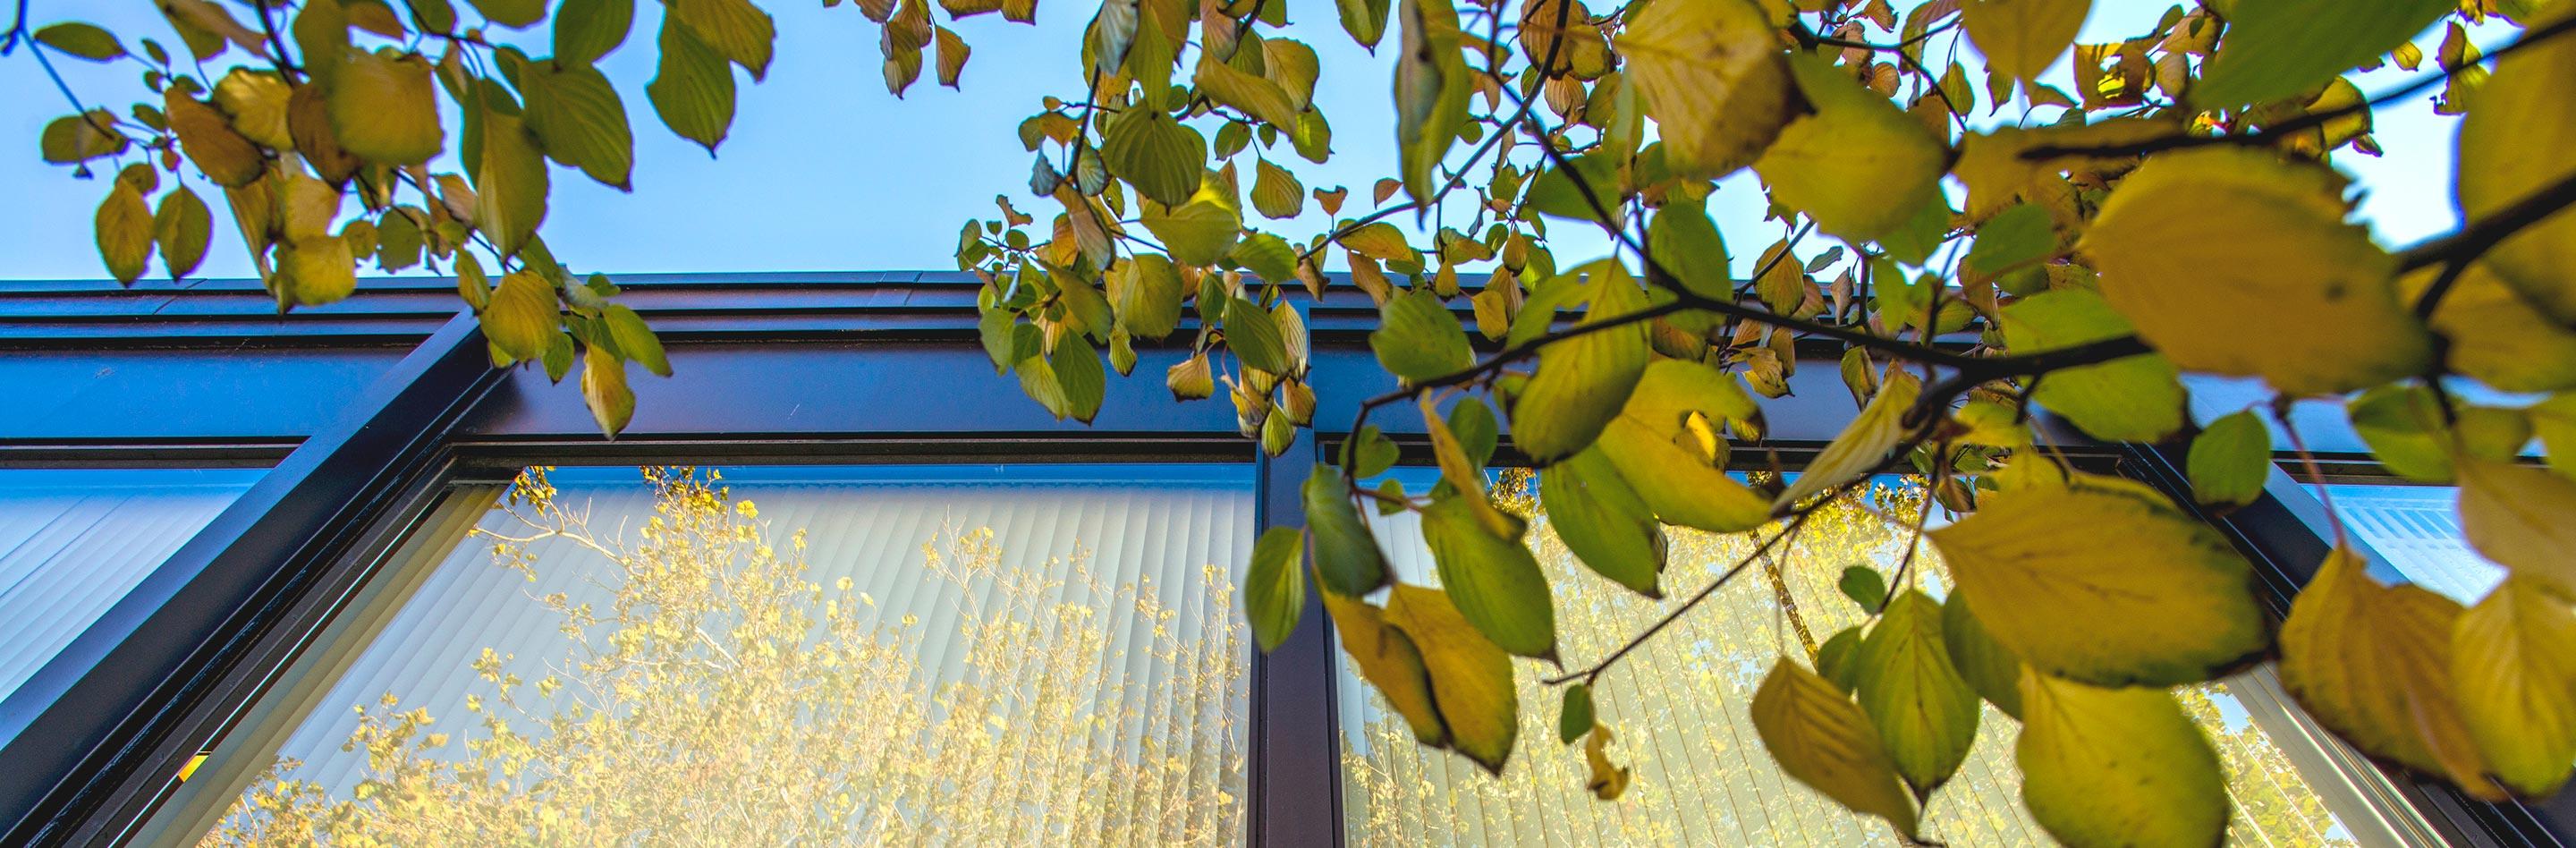 Exterior window of Edith Abbott Hall. A clear light blue sky above and light green, yellow leaves in the foreground.